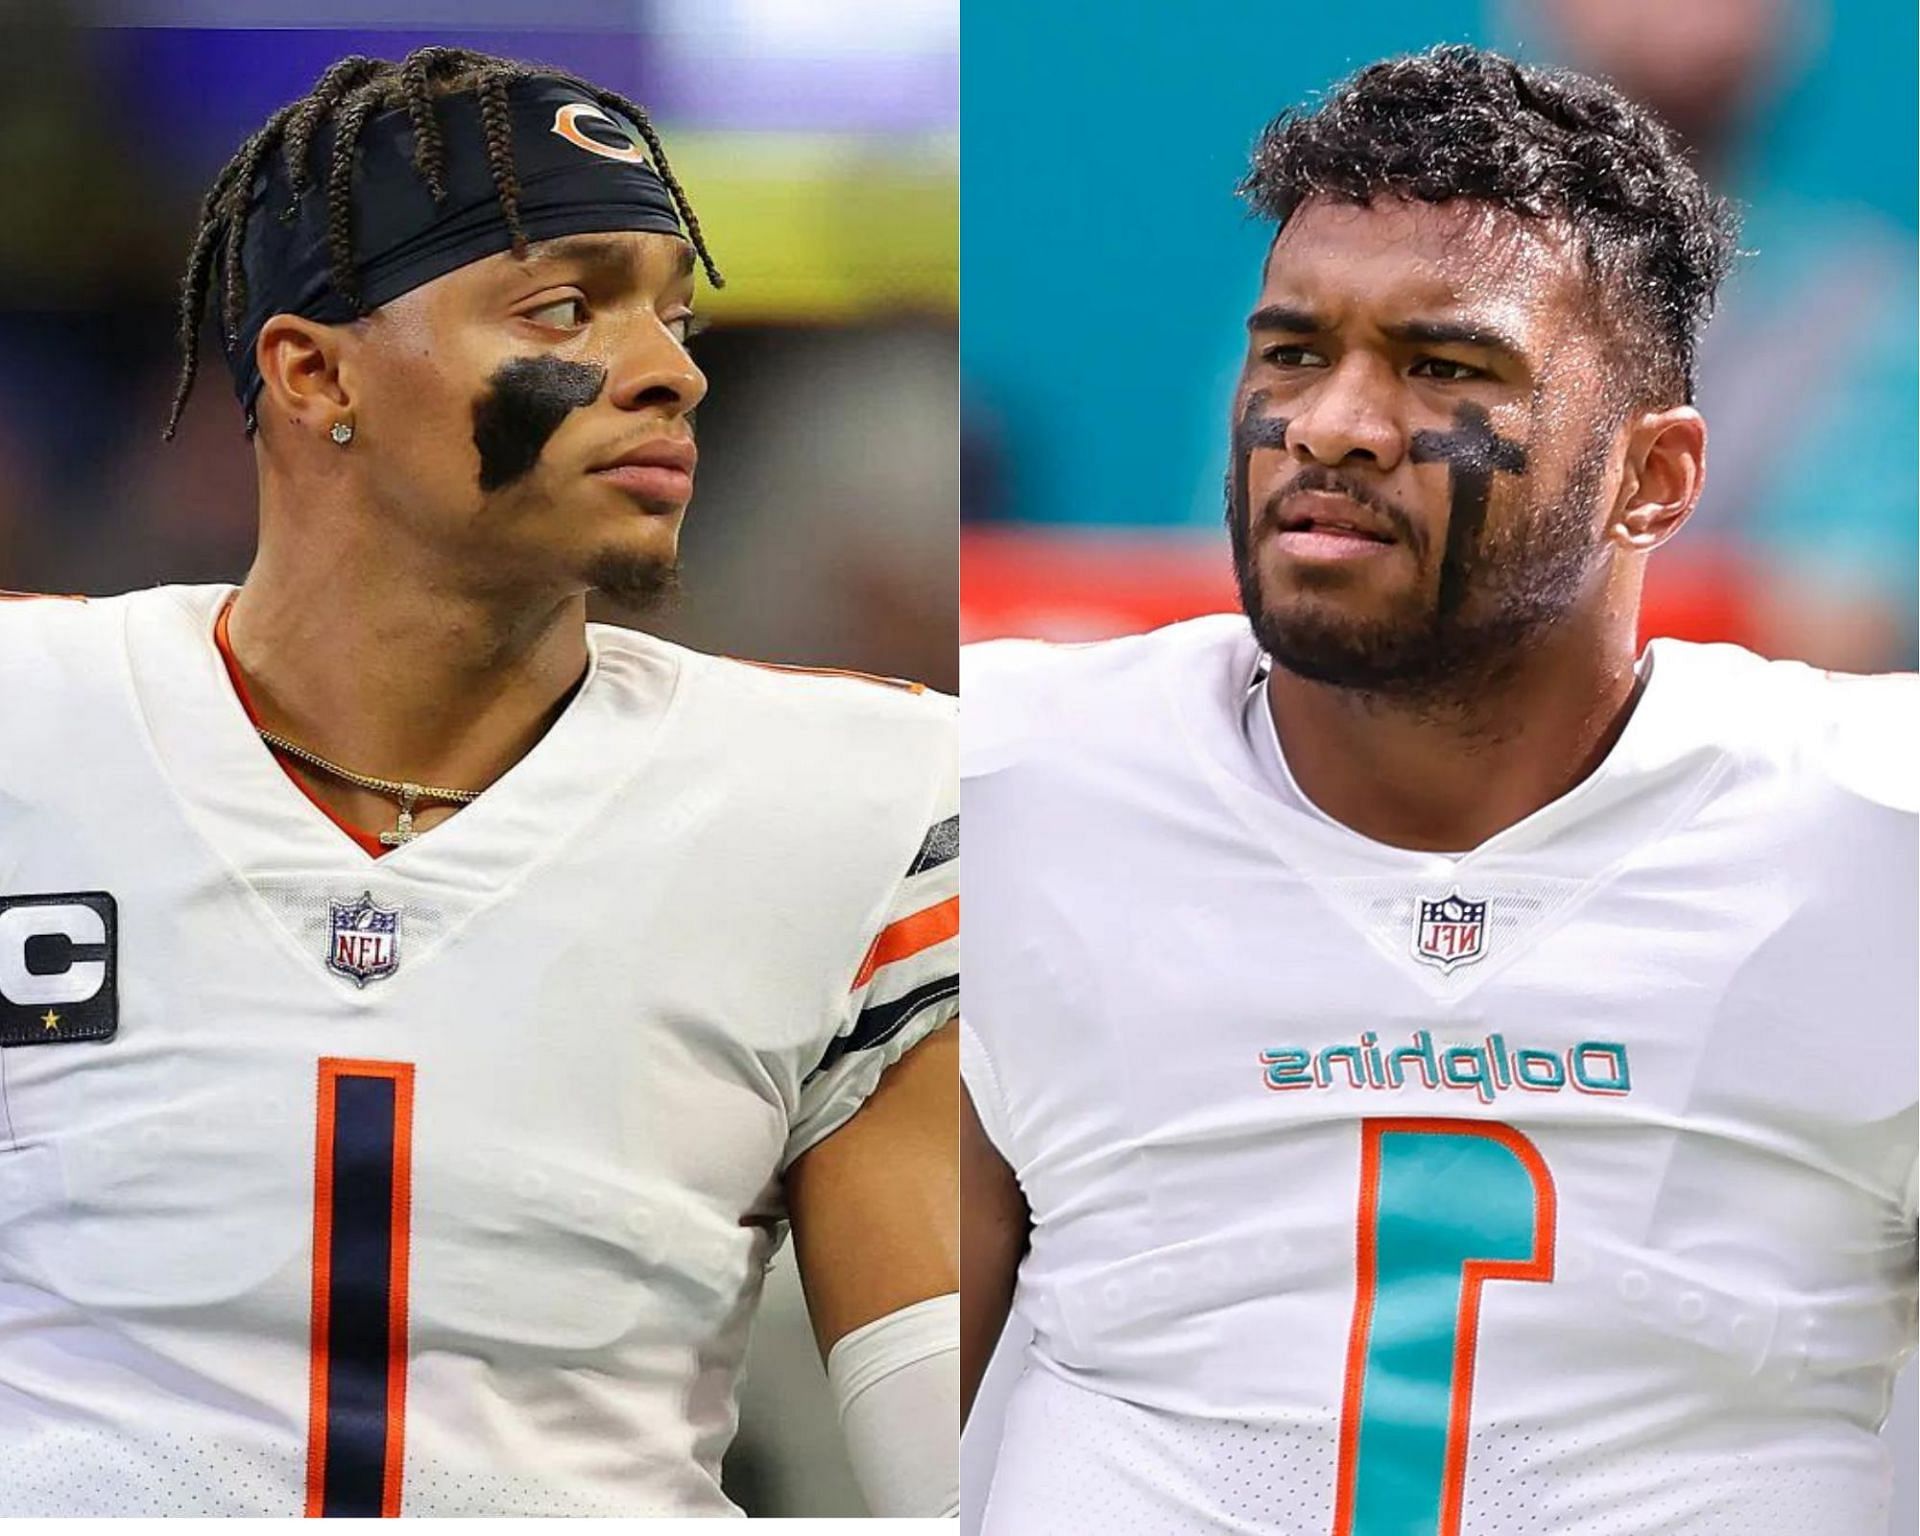 Justin Fields or Tua Tagovailoa? Week 13 Fantasy football outlooks for the  Bears and Dolphins QBs